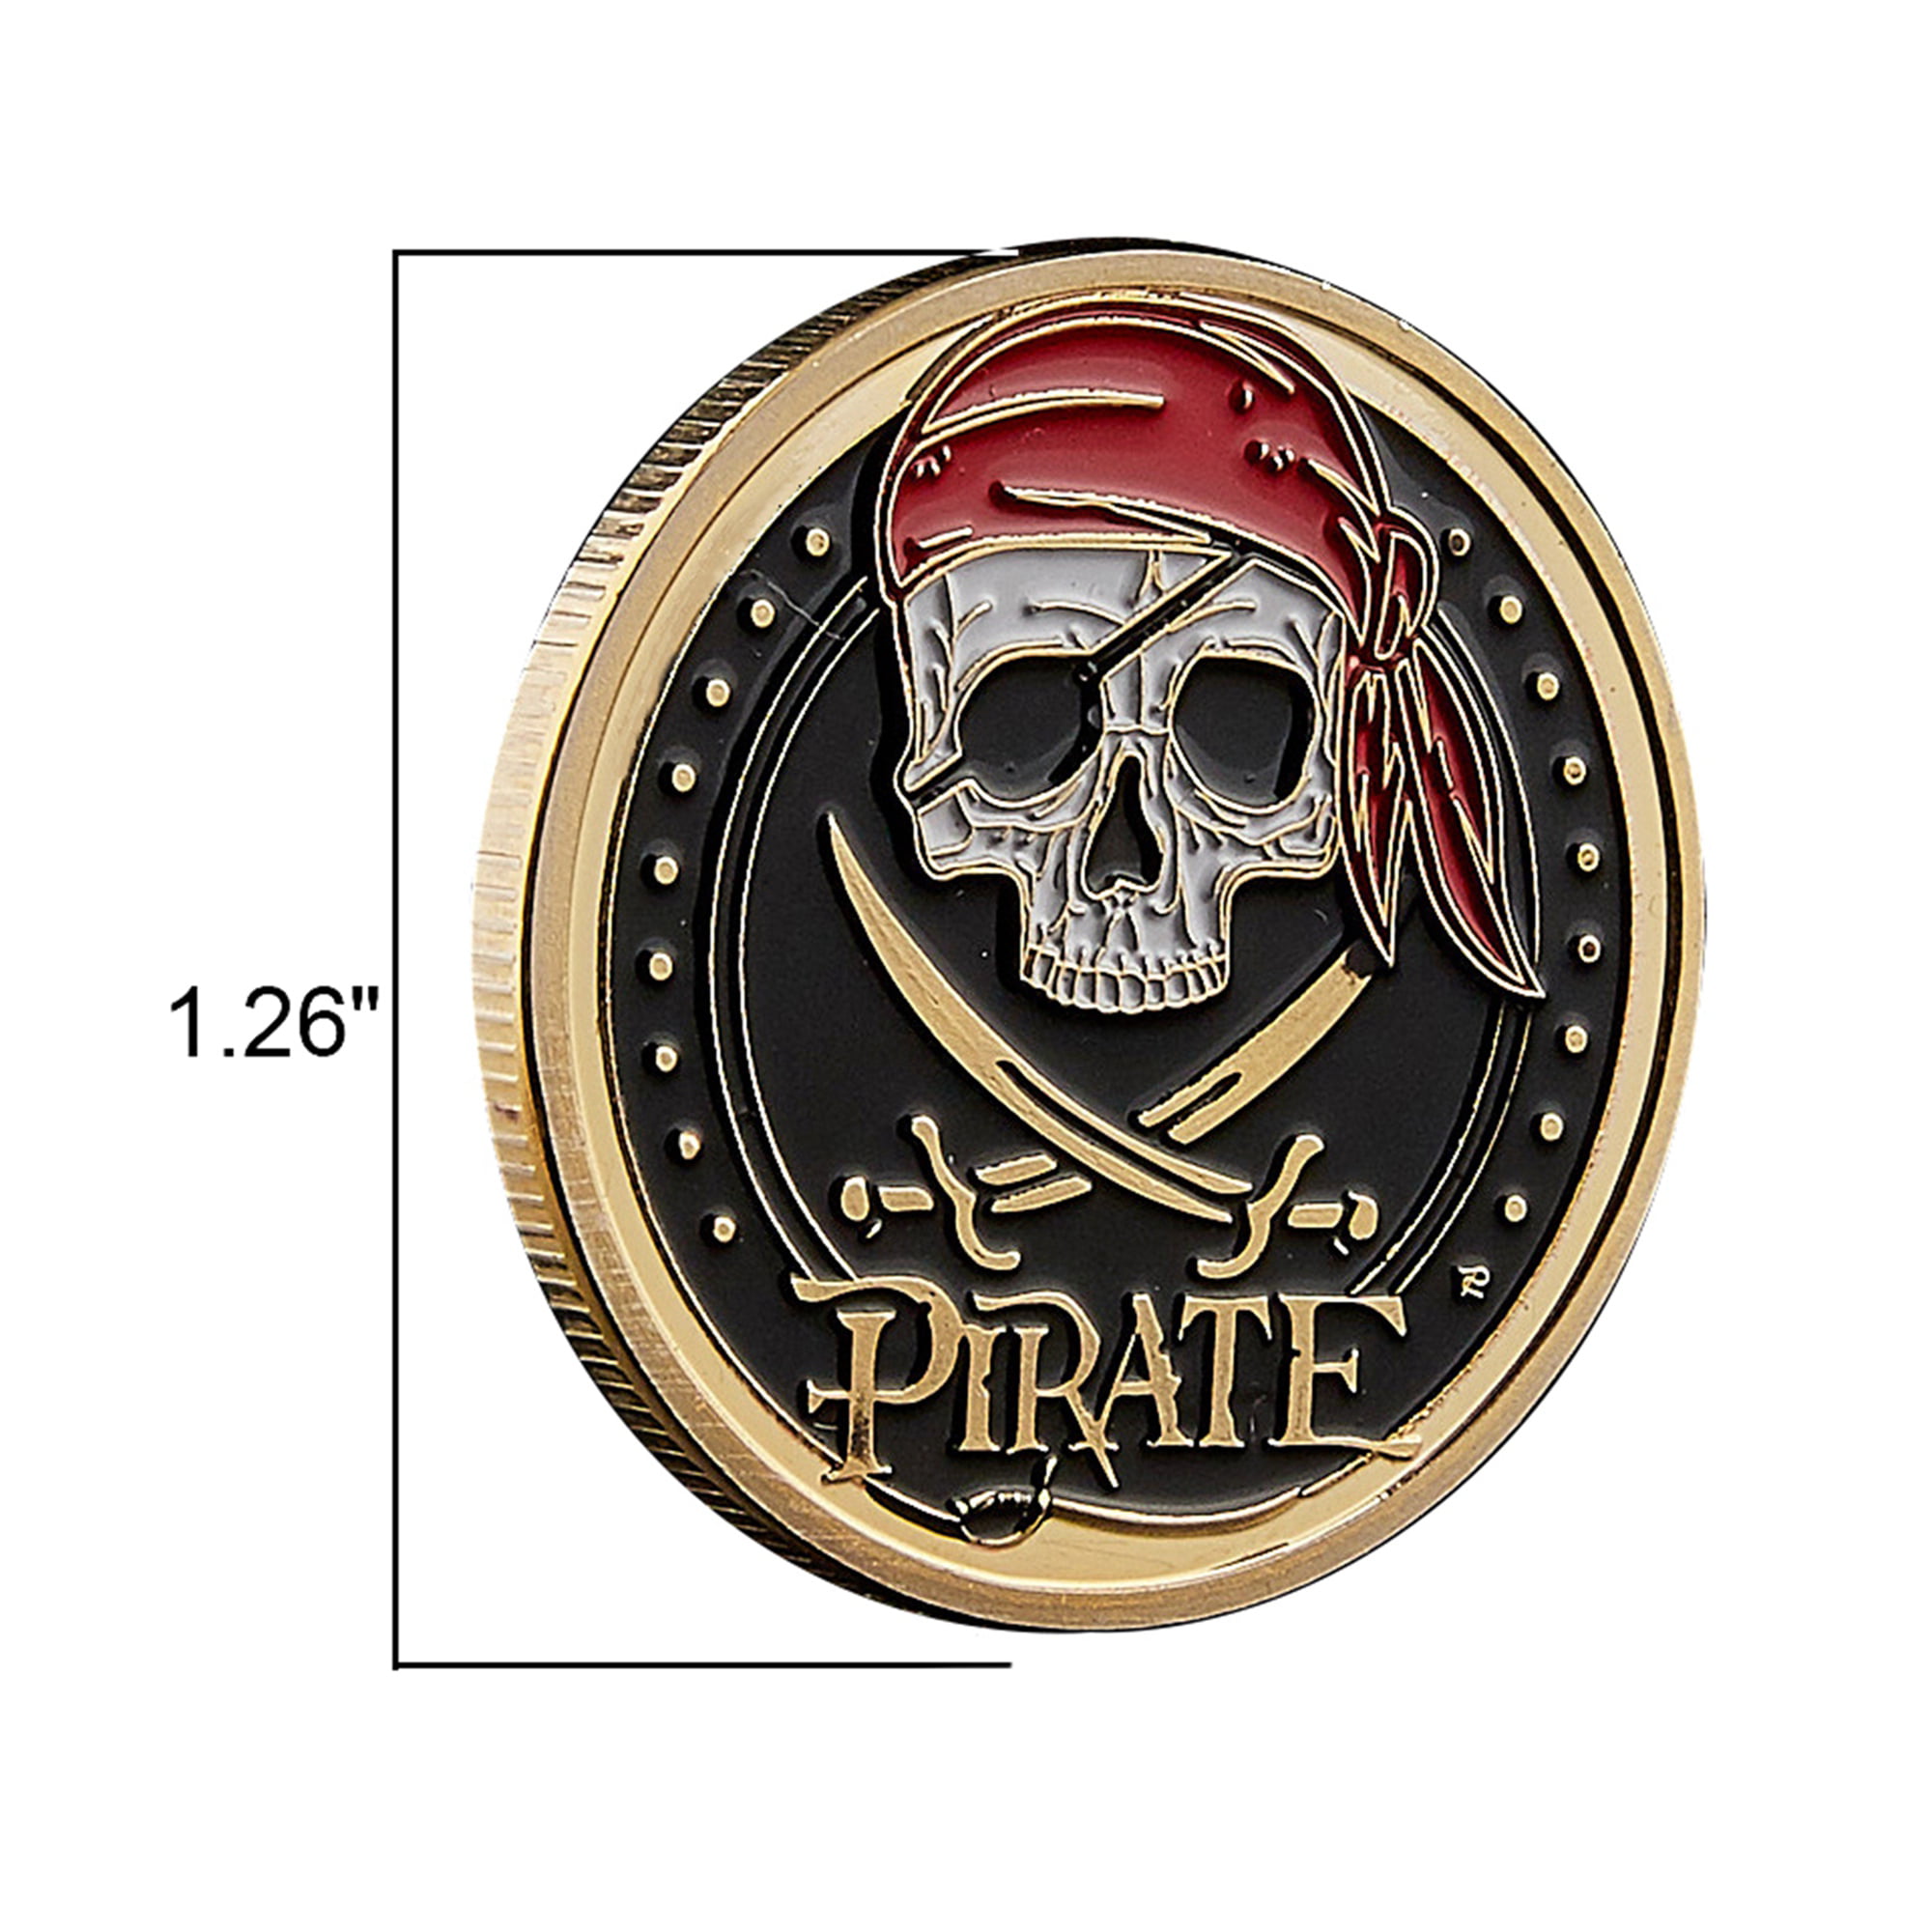 Skull Pirate Ship Lion of The Sea Running Wild Treasure Gold Challenge Coin 